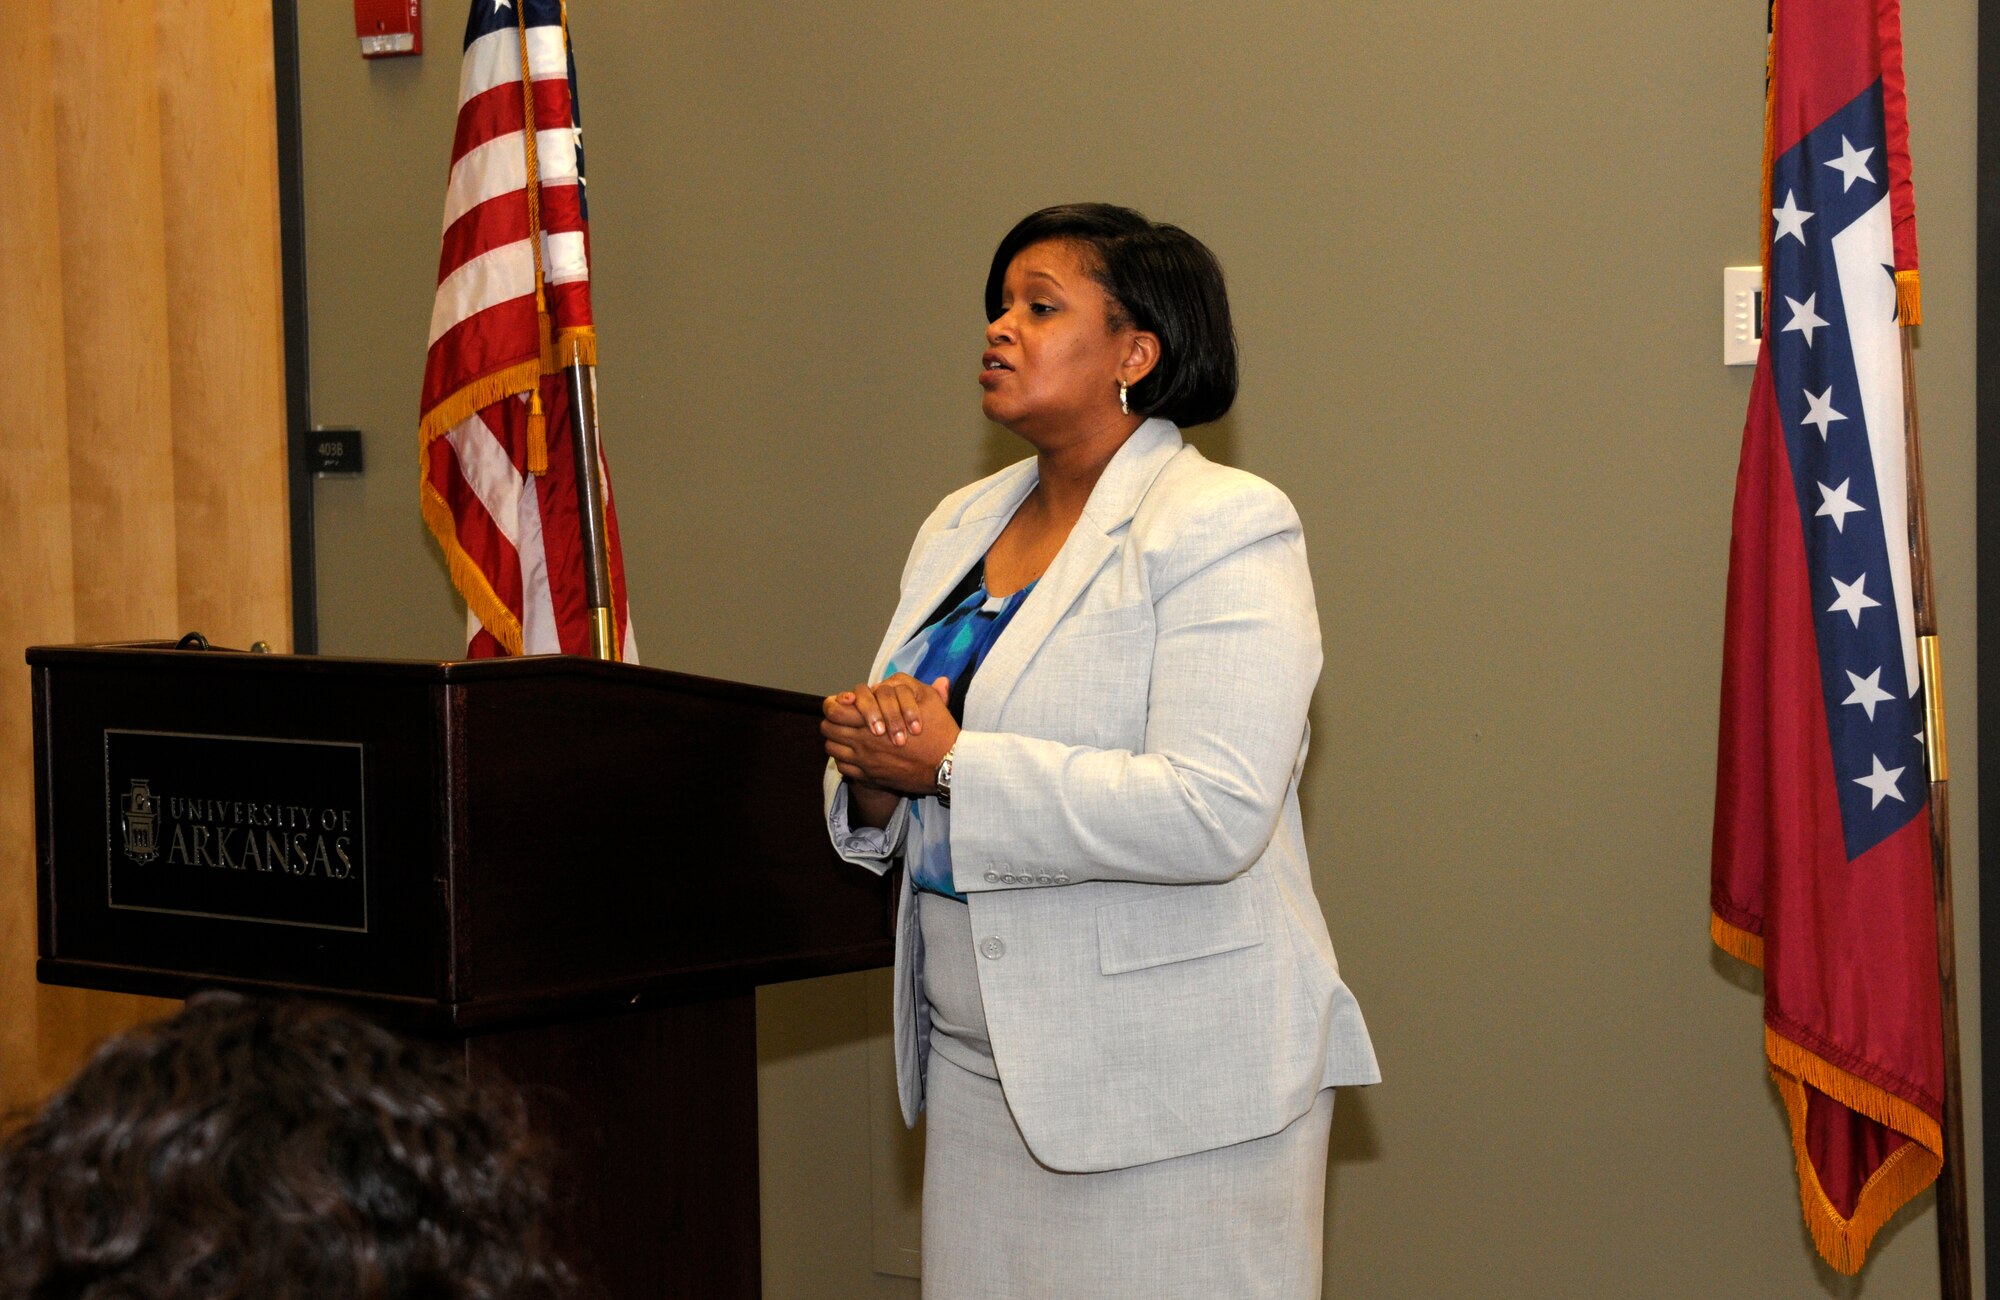 Maj. Danielle Wood, 188th Wing Equal Opportunity chief, addresses a gathering during an Employer Support of the Guard and Reserve Patriot Award presentation held at the University of Arkansas Center for Multicultural and Diversity Education in Fayetteville, Arkansas, Sept. 19, 2014. Wood recognized her employer and supervisors for their support of her Air National Guard career during the event. Dr. Wood is also the UA Office of Equal Opportunity & Compliance director.  (U.S. Air National Guard photo by Maj. Heath Allen/Released) 